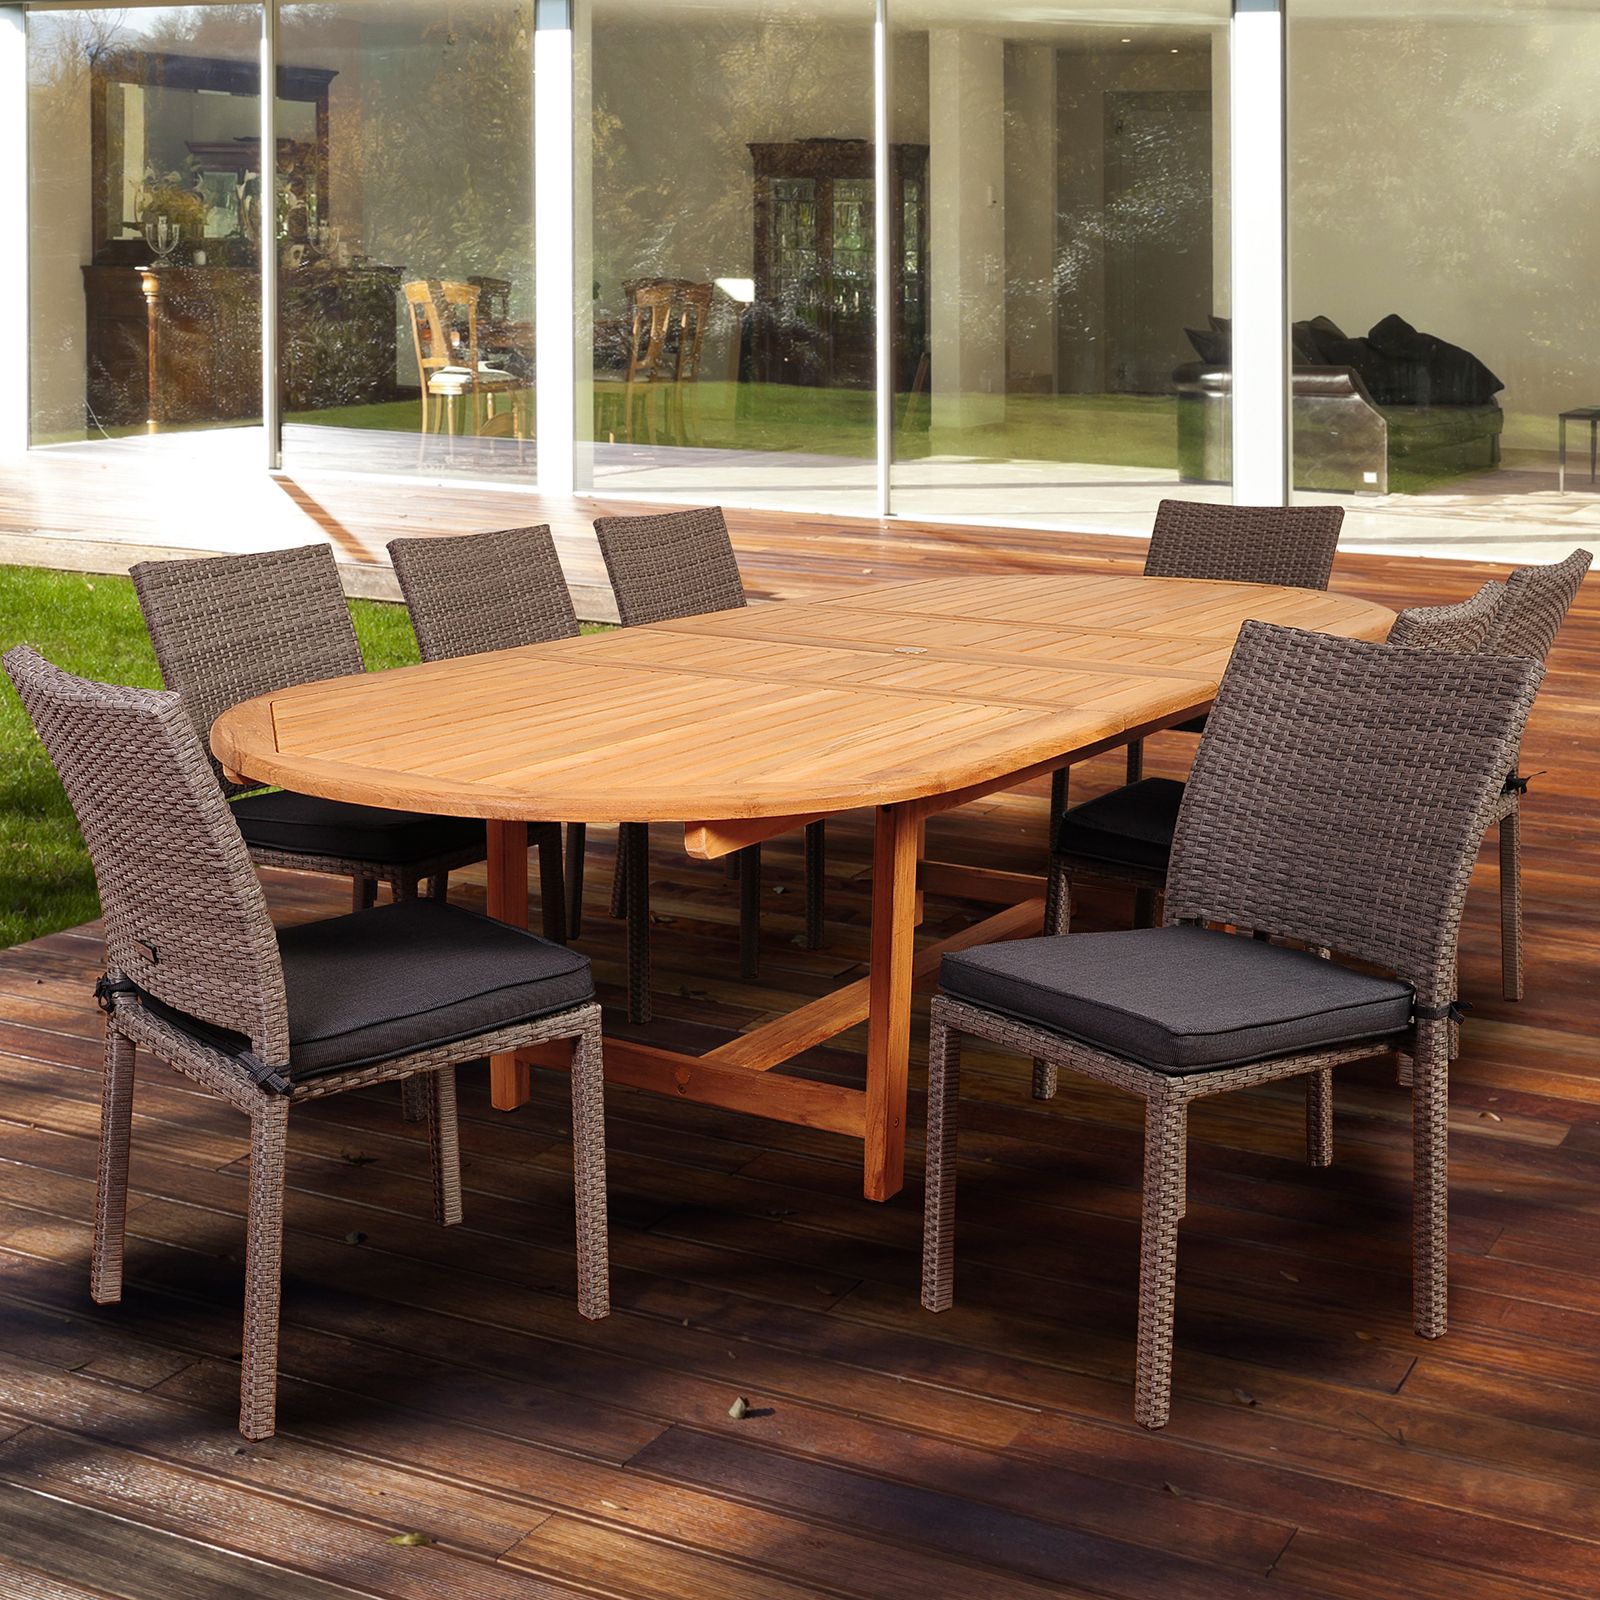 Amazonia East Point 9 Piece Double Extendable Dining Set With Cushions Throughout Extendable Patio Dining Set (View 8 of 15)